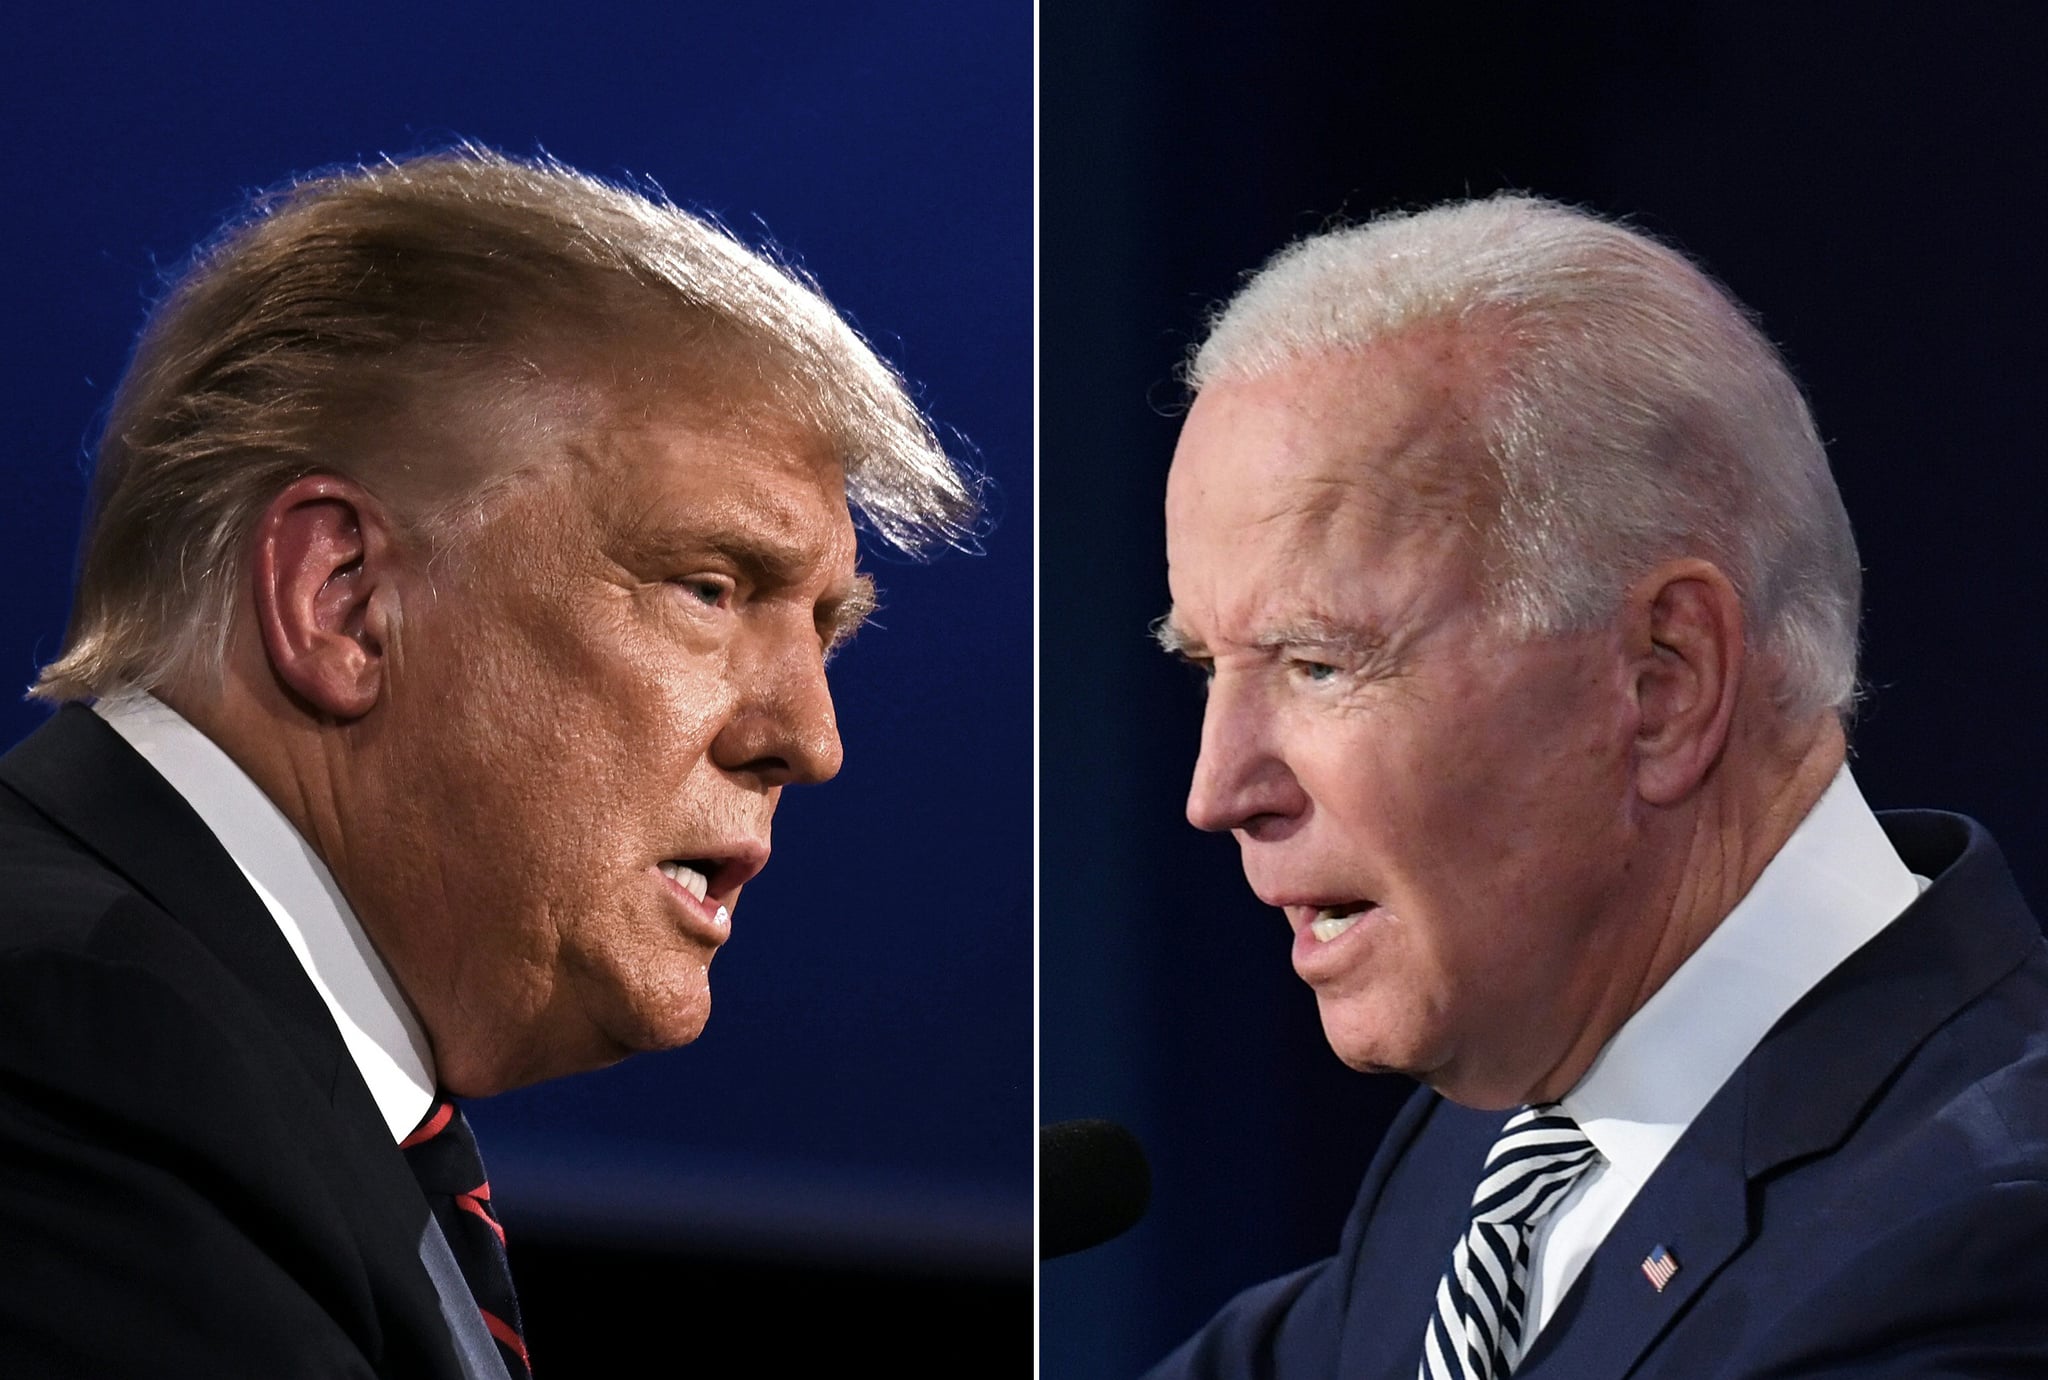 (COMBO) This combination of pictures created on September 29, 2020 shows US President Donald Trump (L) and Democratic Presidential candidate former Vice President Joe Biden squaring off during the first presidential debate at the Case Western Reserve University and Cleveland Clinic in Cleveland, Ohio on September 29, 2020. (Photos by JIM WATSON and SAUL LOEB / AFP) (Photo by JIM WATSON,SAUL LOEB/AFP via Getty Images)